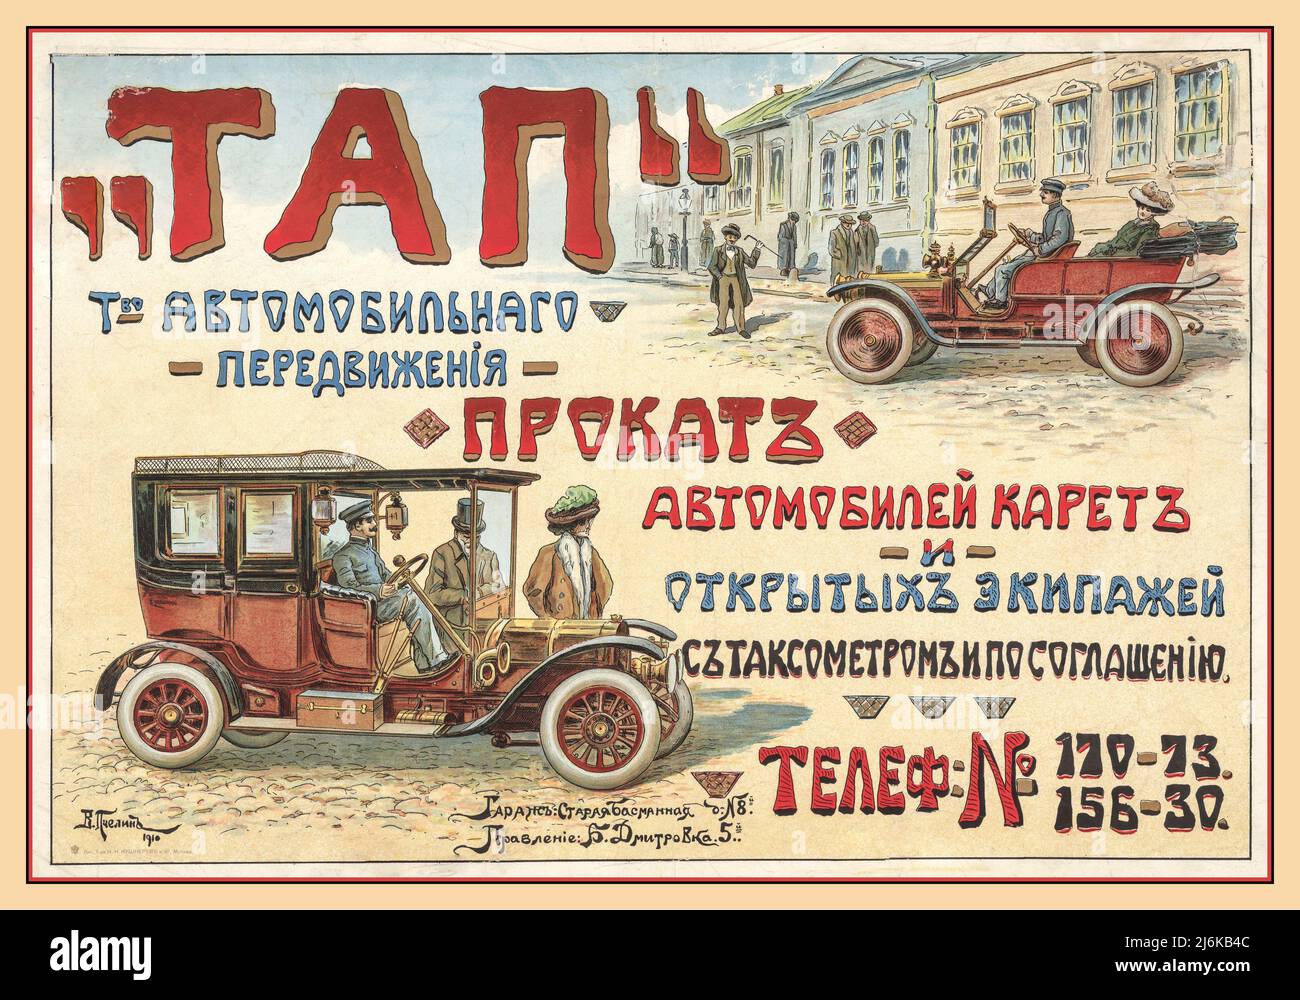 Vintage Russian Taxi Rental Poster 1910 TAP - Association of Automobile Transportation. Car taxi rental of carriages and open carriages with a taximeter and by negotiation agreement. Russia Soviet Union USSR 1900s   Author Vladimir Nikolaevich Pchelin  (1869–1941) Stock Photo